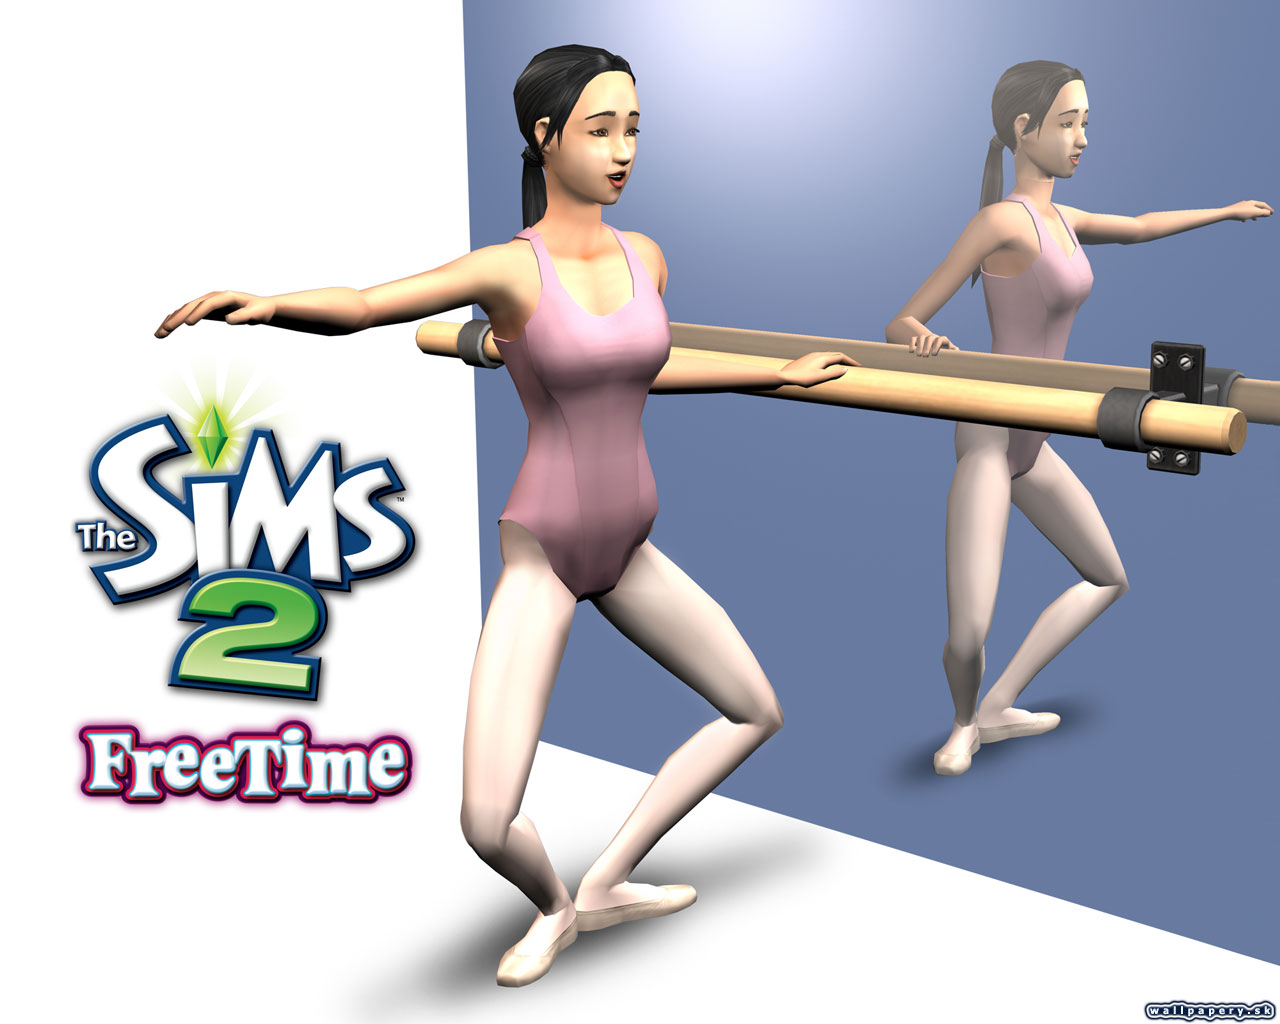 The Sims 2: Free Time - wallpaper 10